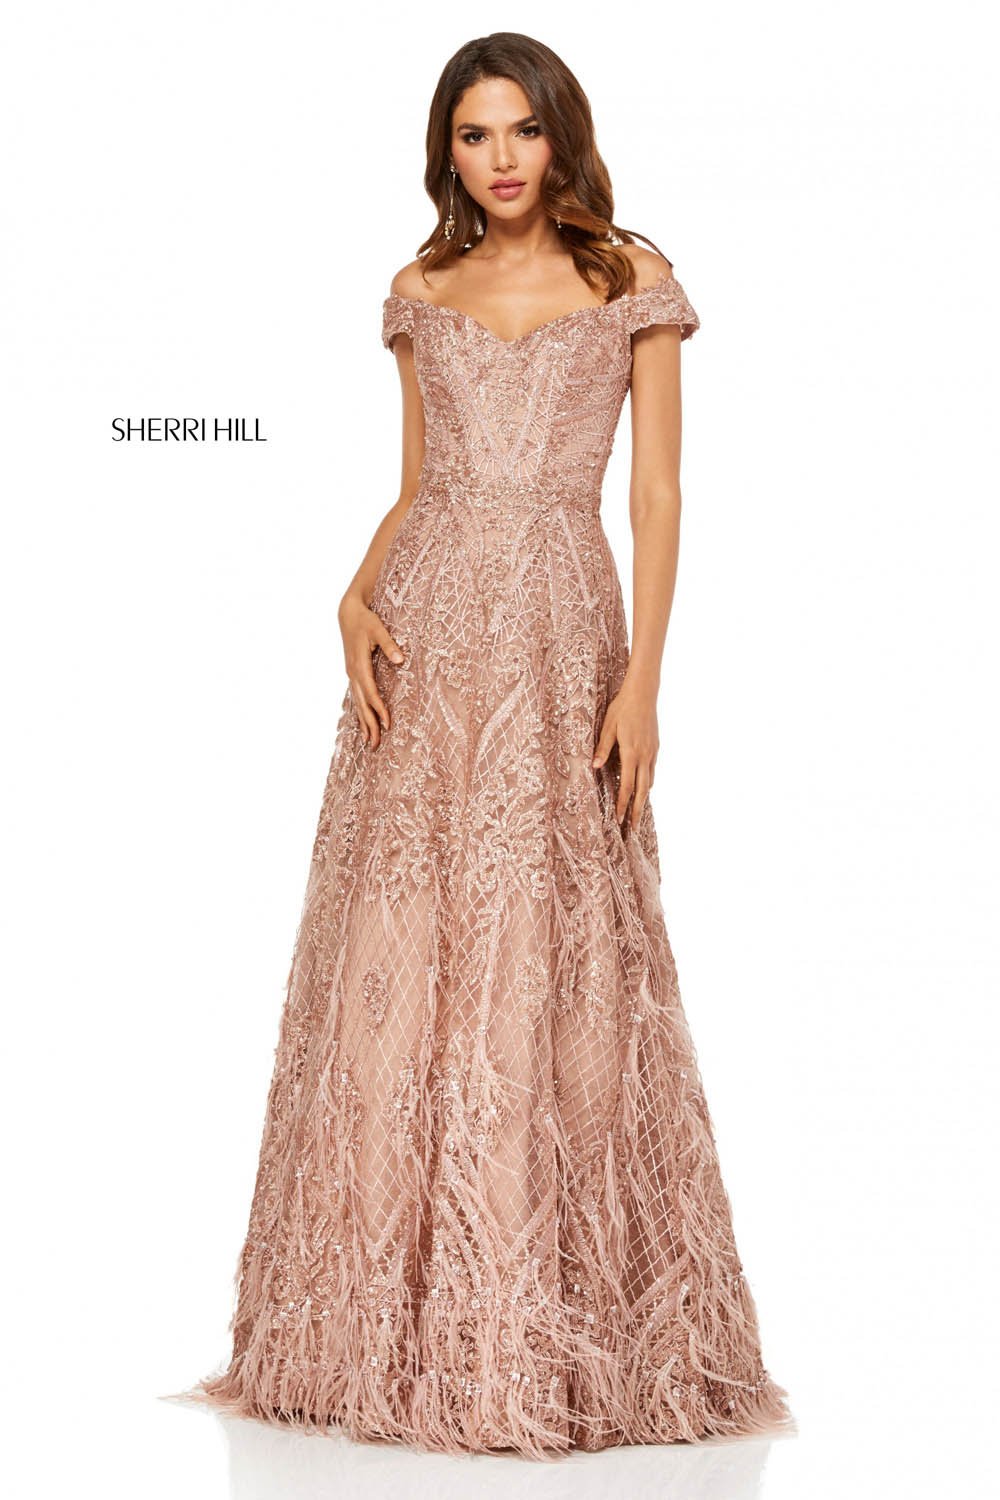 Sherri Hill 52650 dress images in these colors: Silver, Rose Gold, Black, Navy, Wine, Gold.